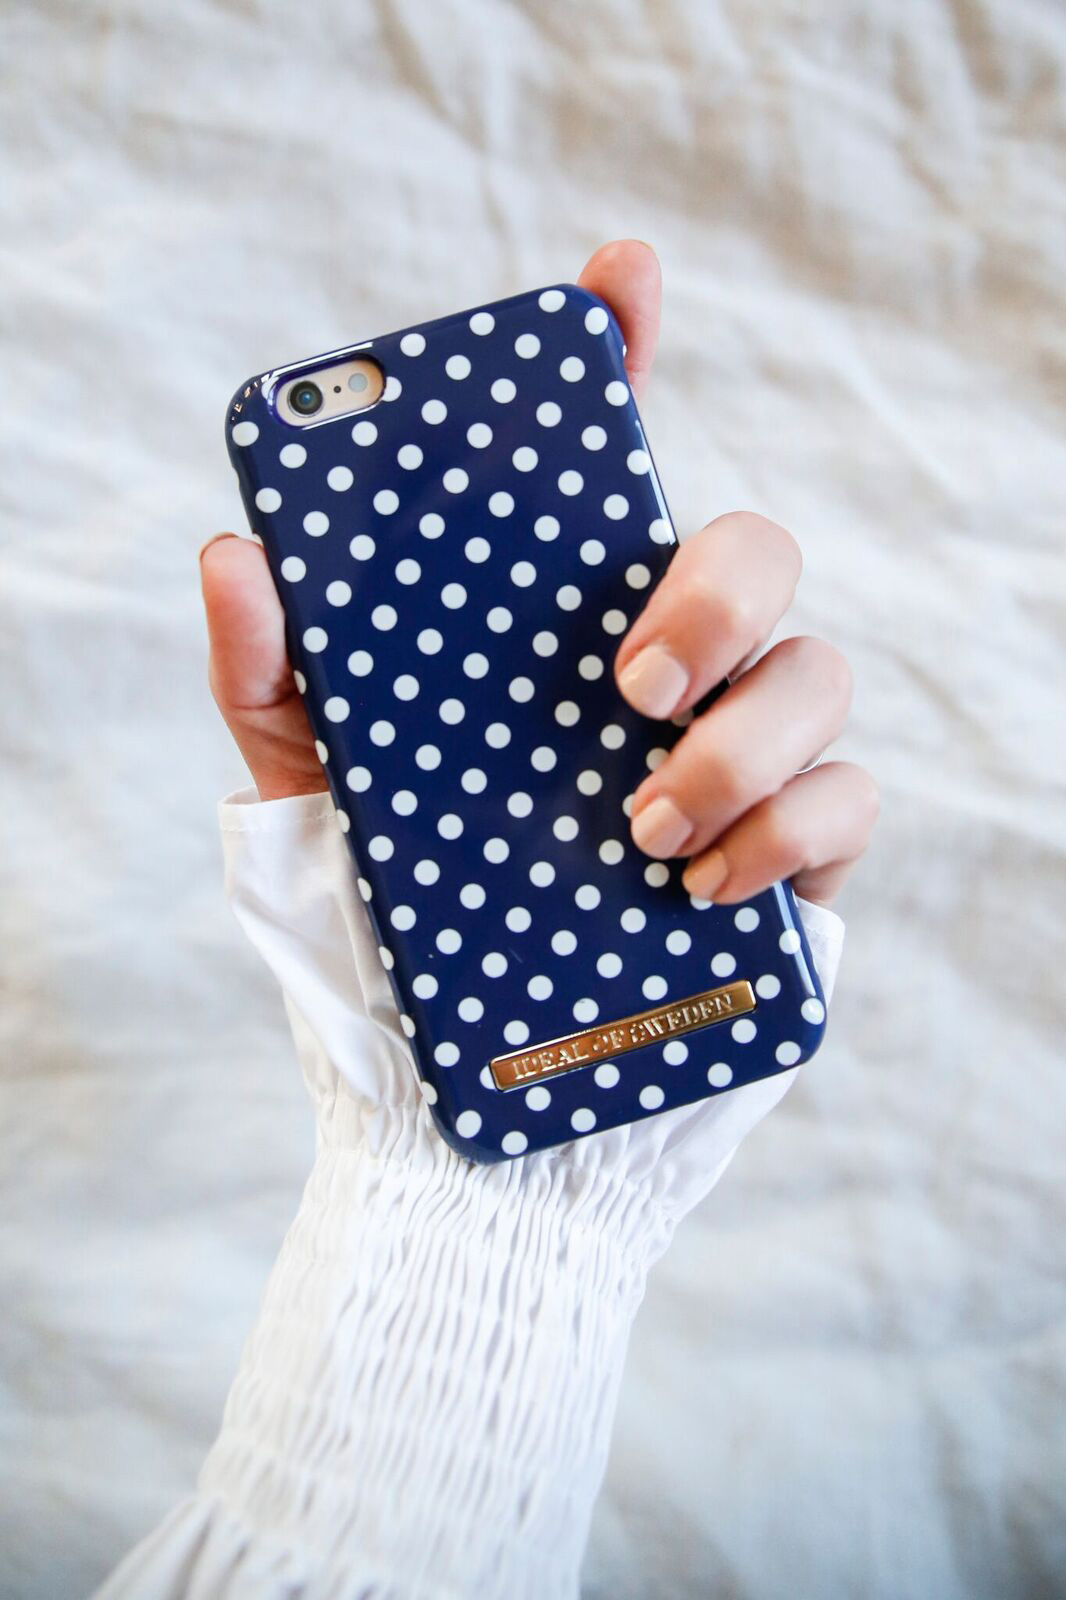 IDEAL OF 8, iPhone 7, 6, SWEDEN iPhone Backcover, Apple, iPhone Polka Fashion, Dots